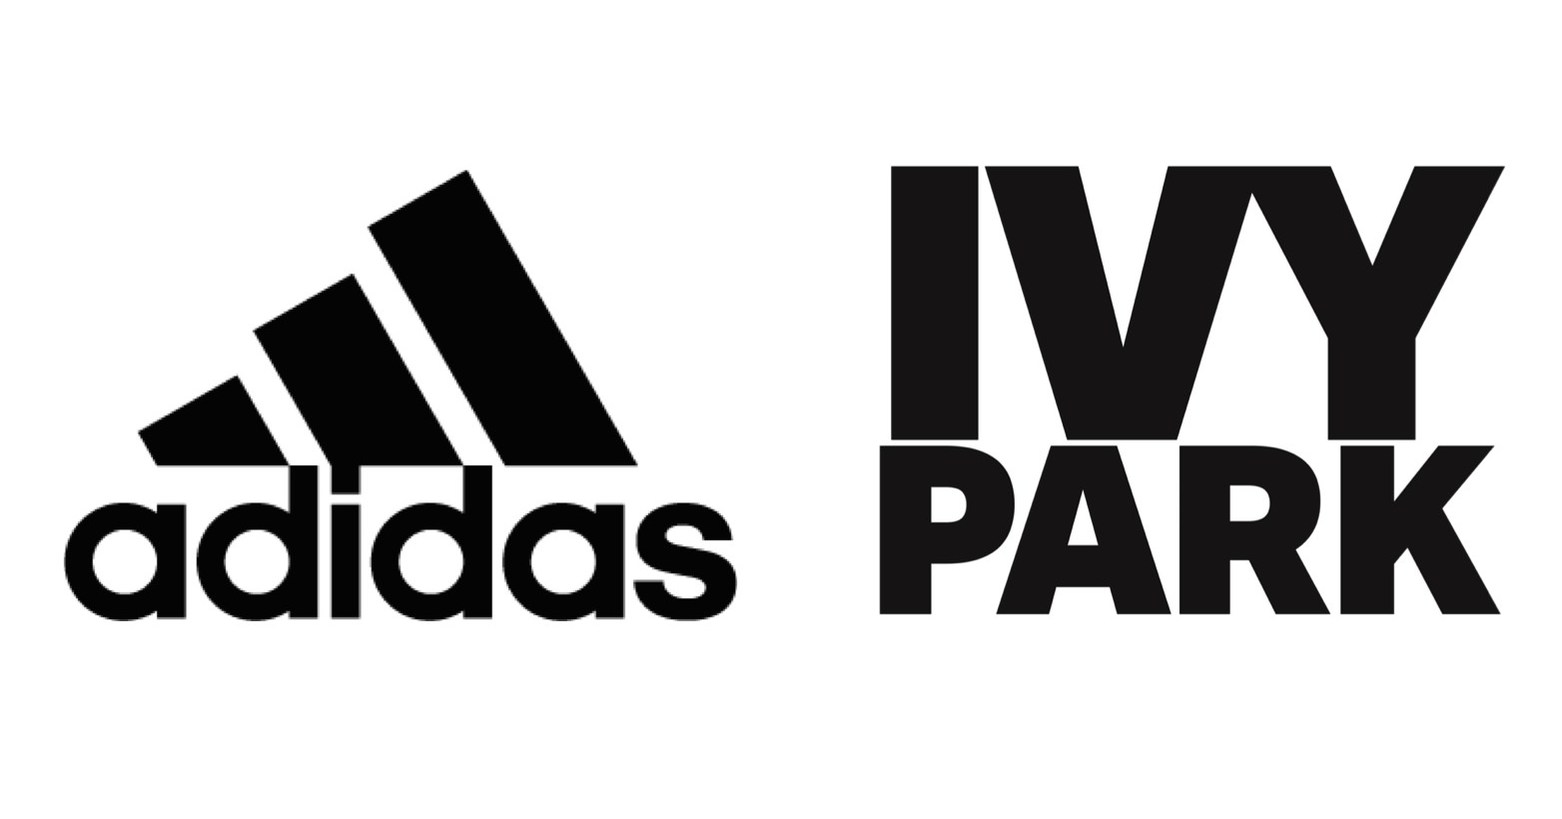 Ivy Park: is the love affair between Adidas and Beyoncé drawing to a close?